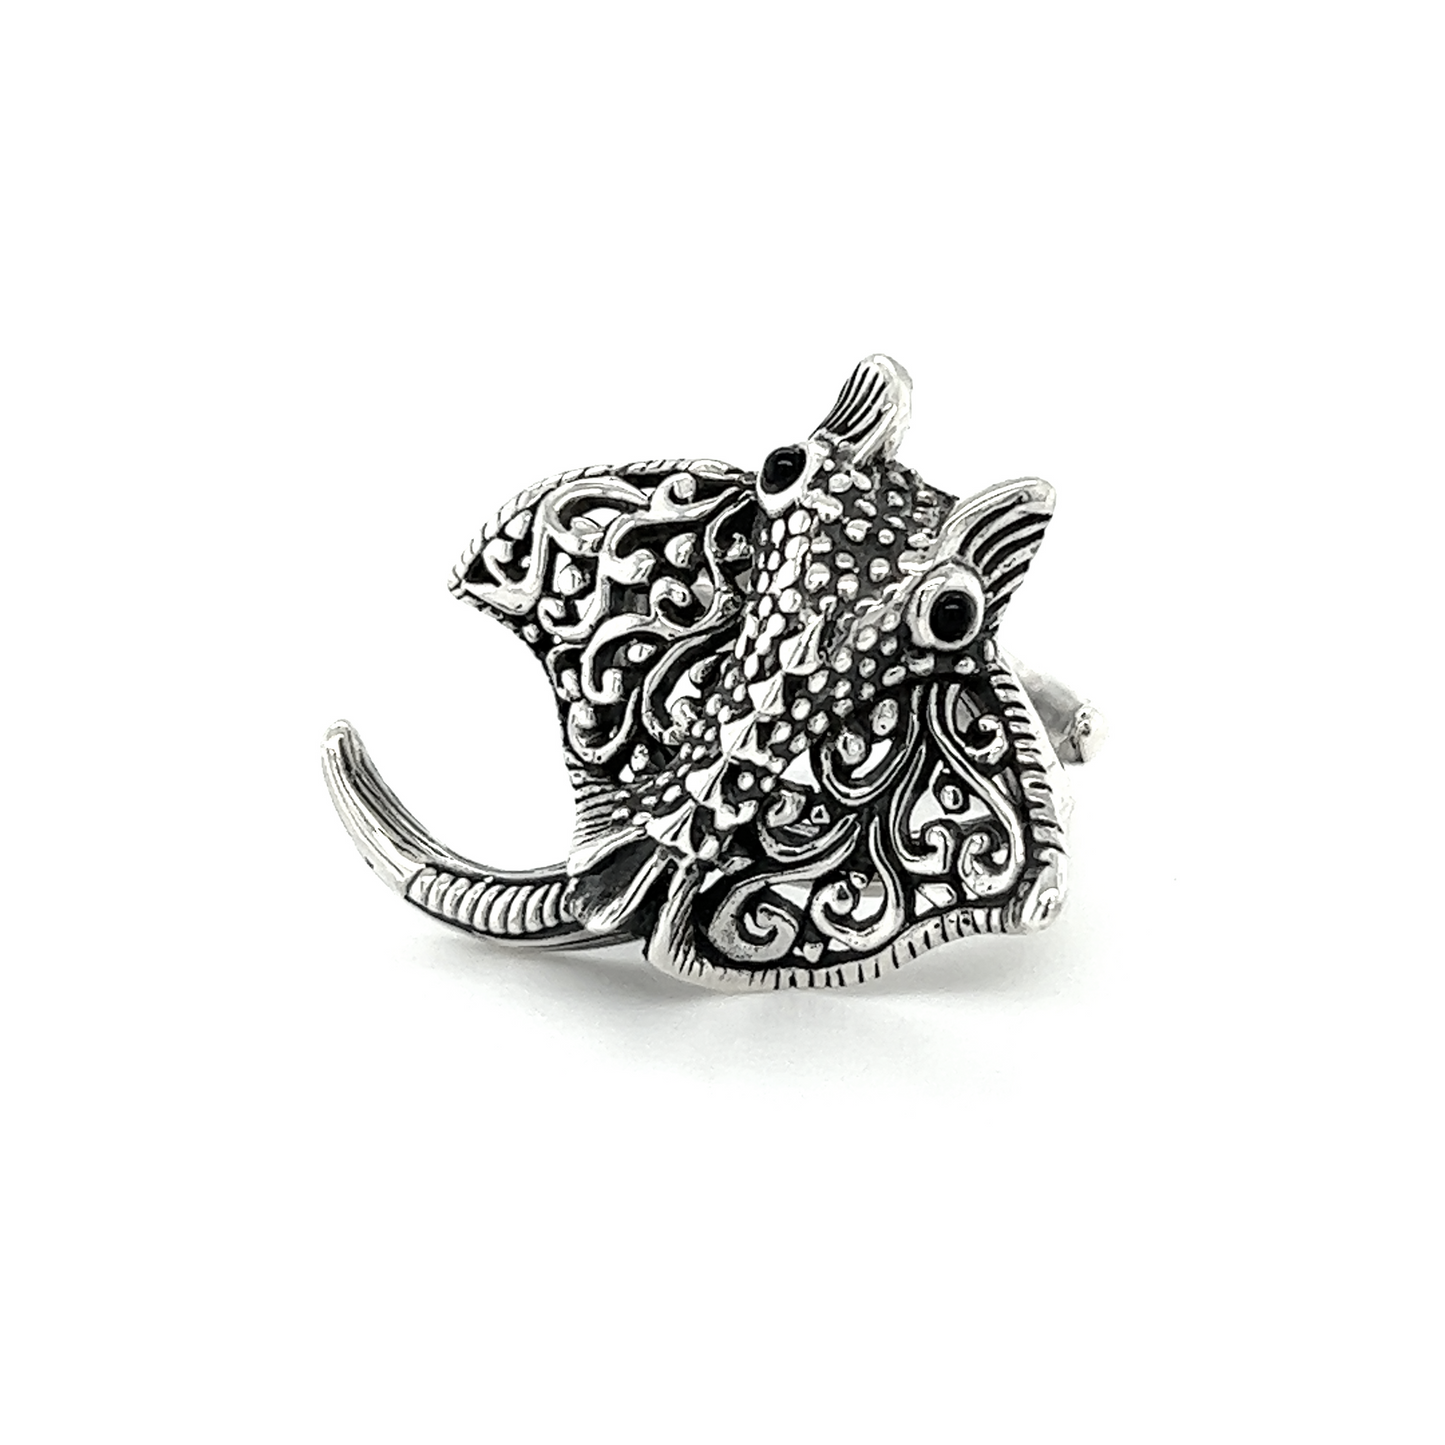 A sterling silver Statement Manta Ray Ring with an ornate ocean-inspired design from Santa Cruz.